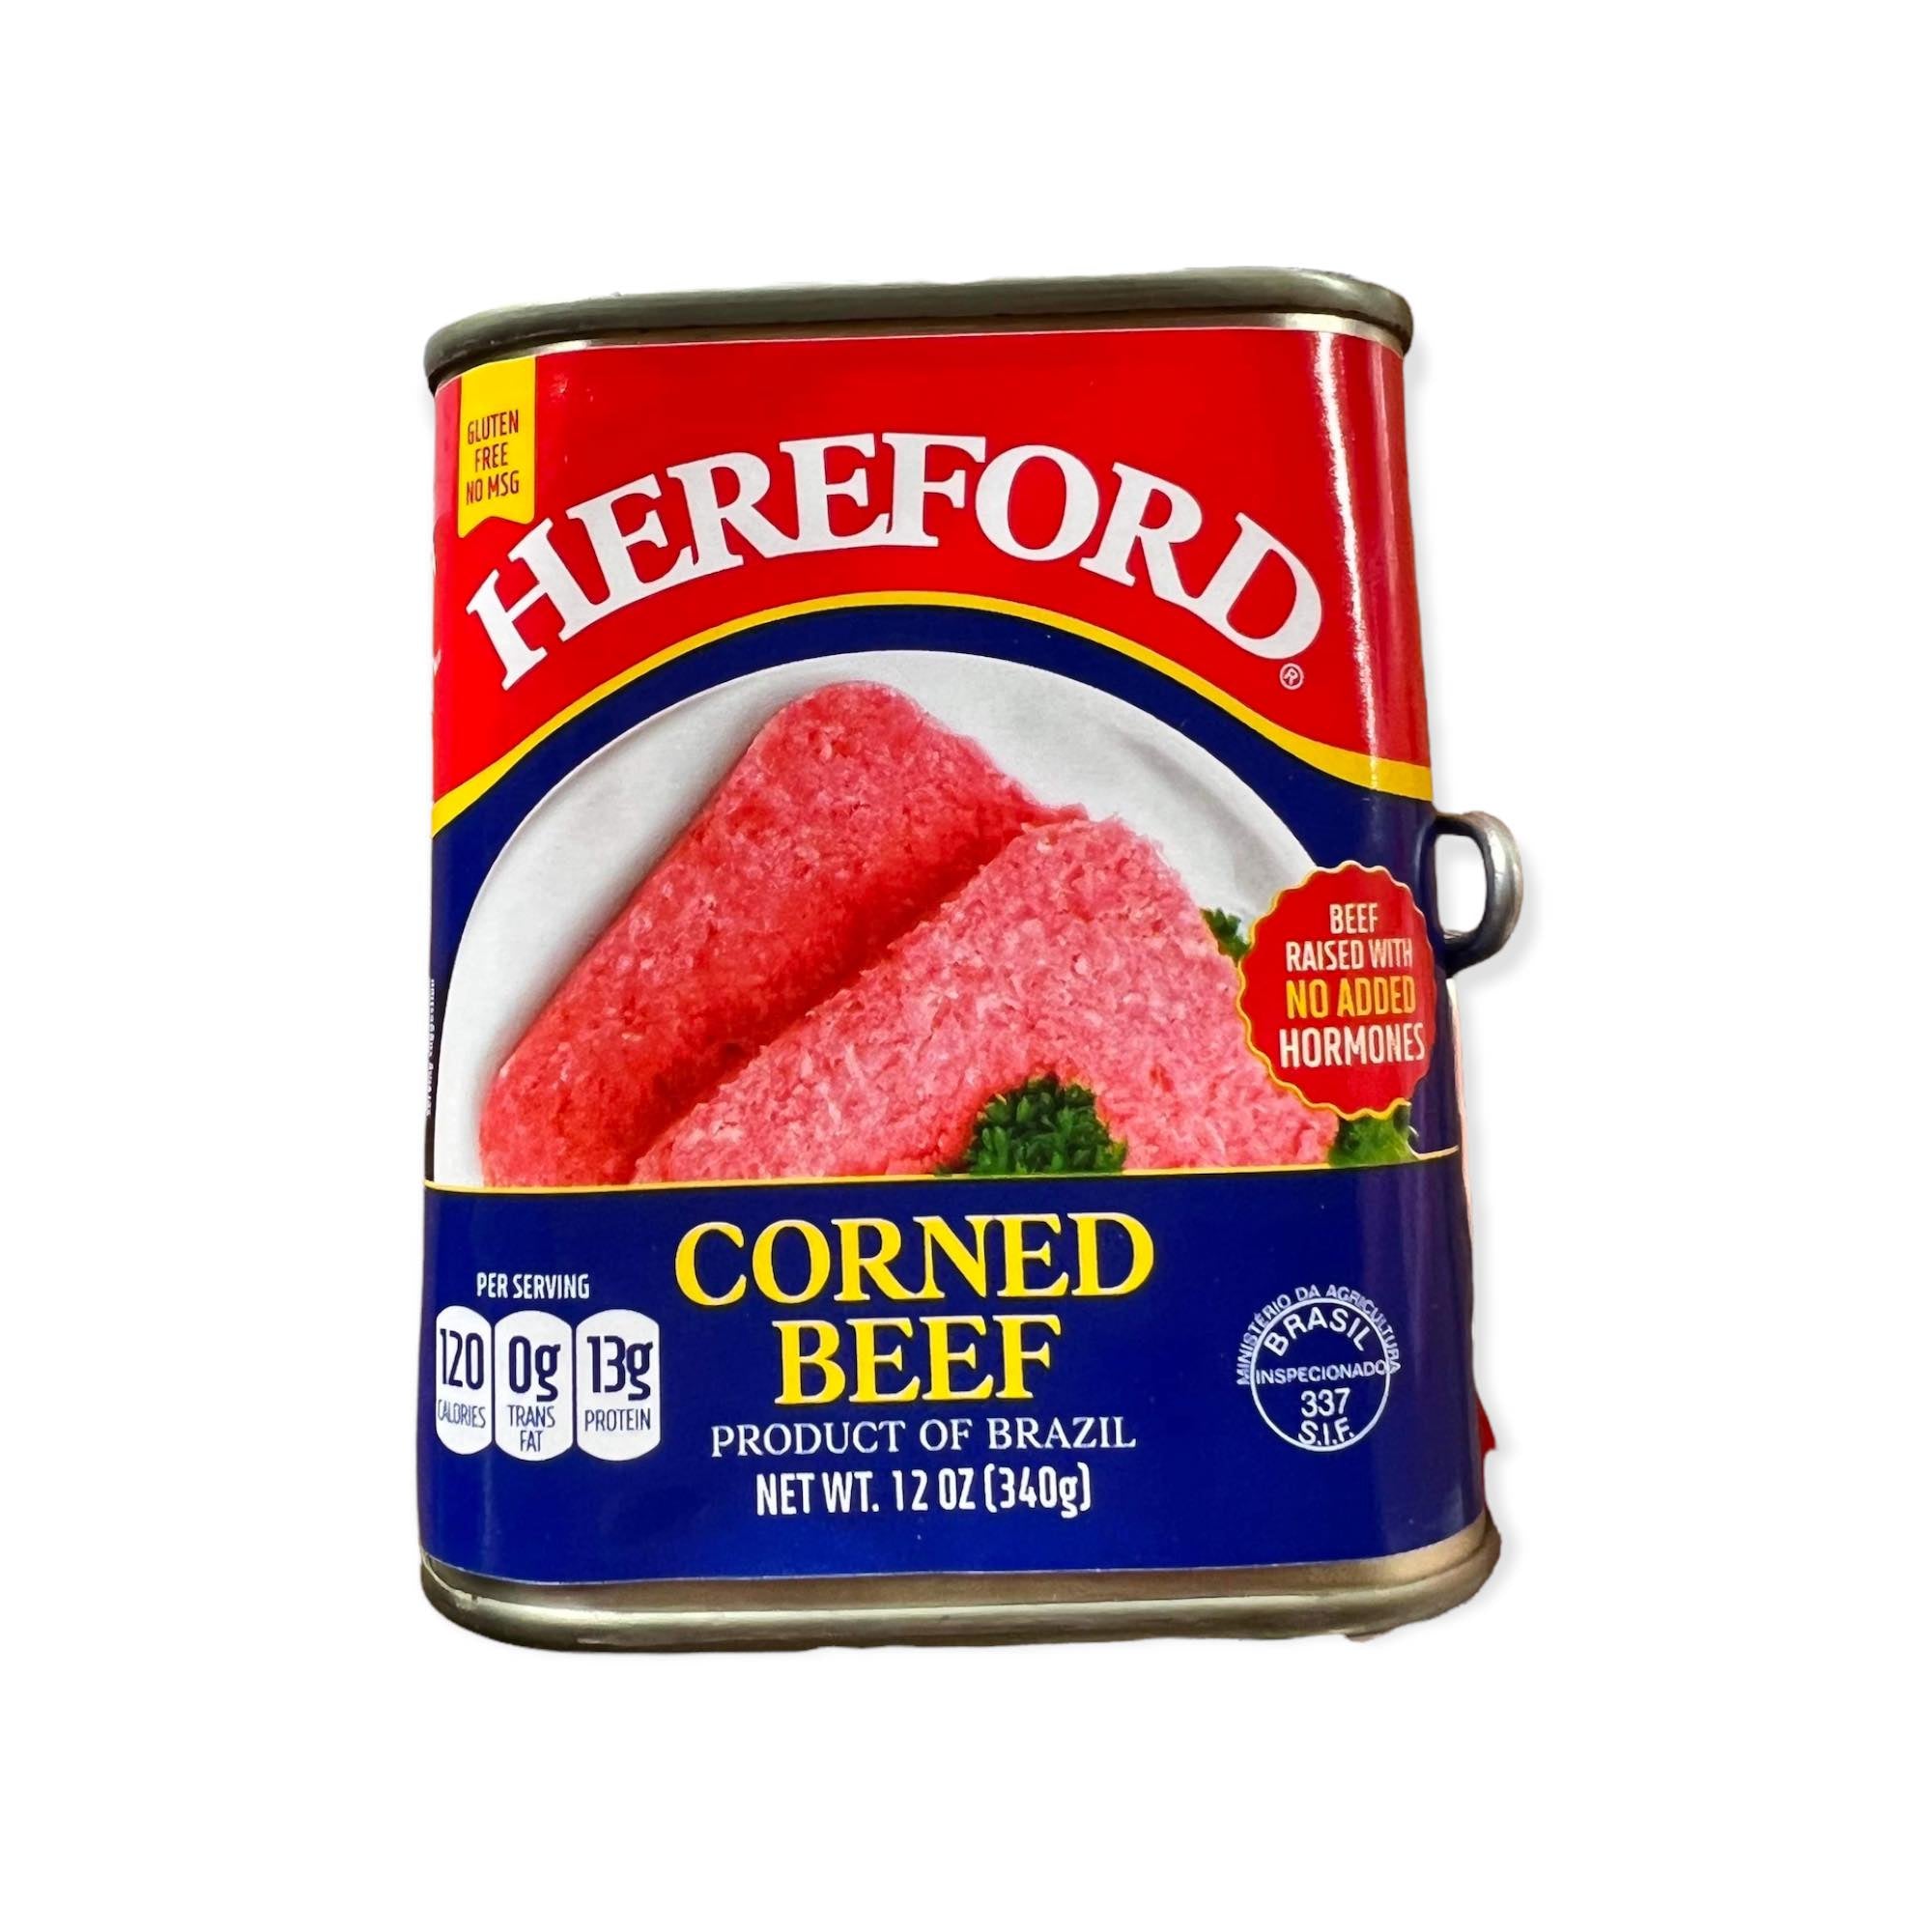 Hereford - Corned Beef with Natural Juices - 12 OZ